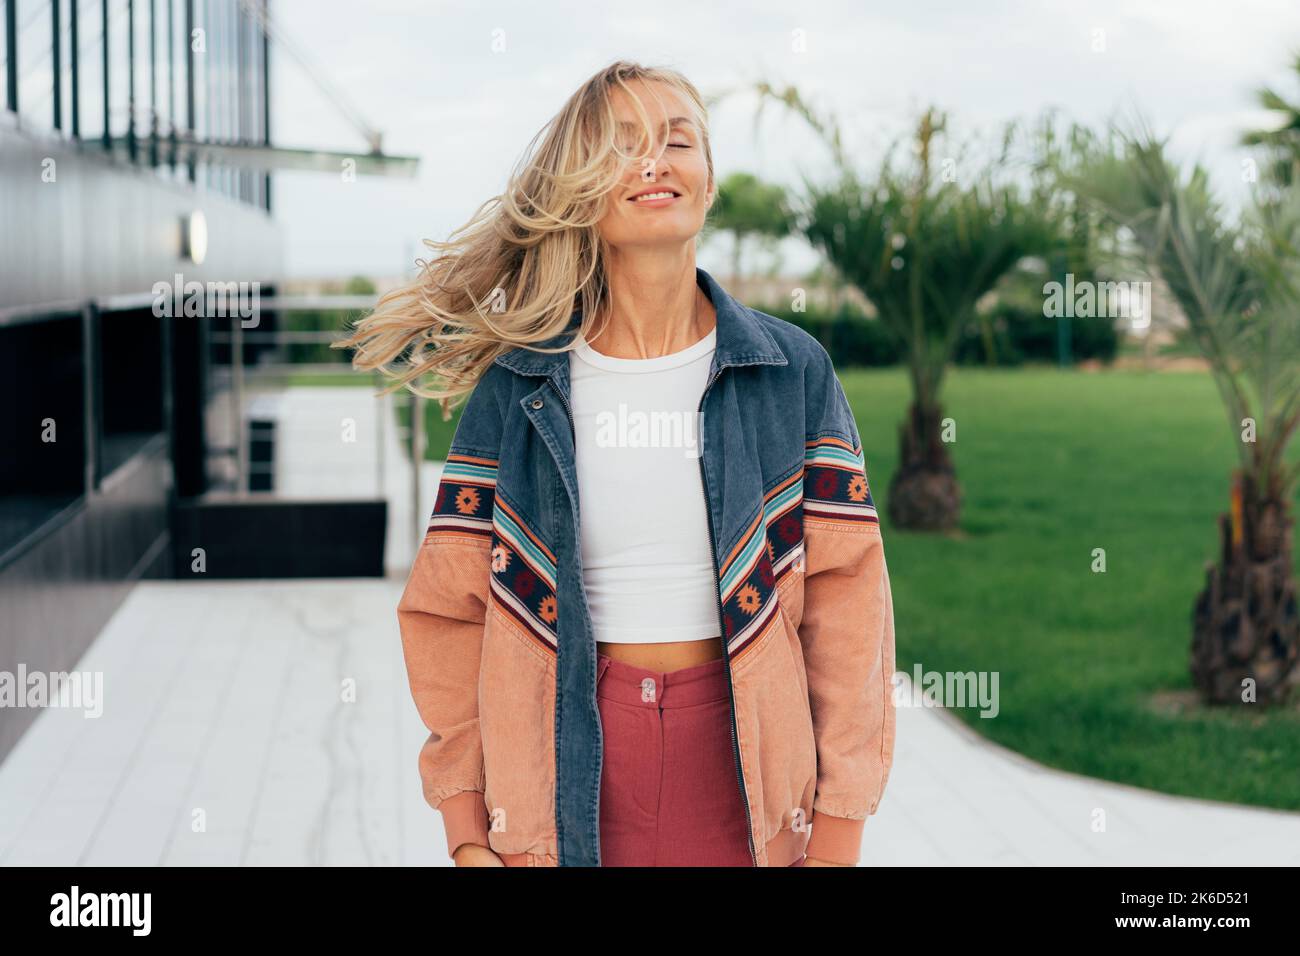 Wind in the hair. Lifestyle portrait of a cheerful caucasian woman with long blond hair. Stock Photo